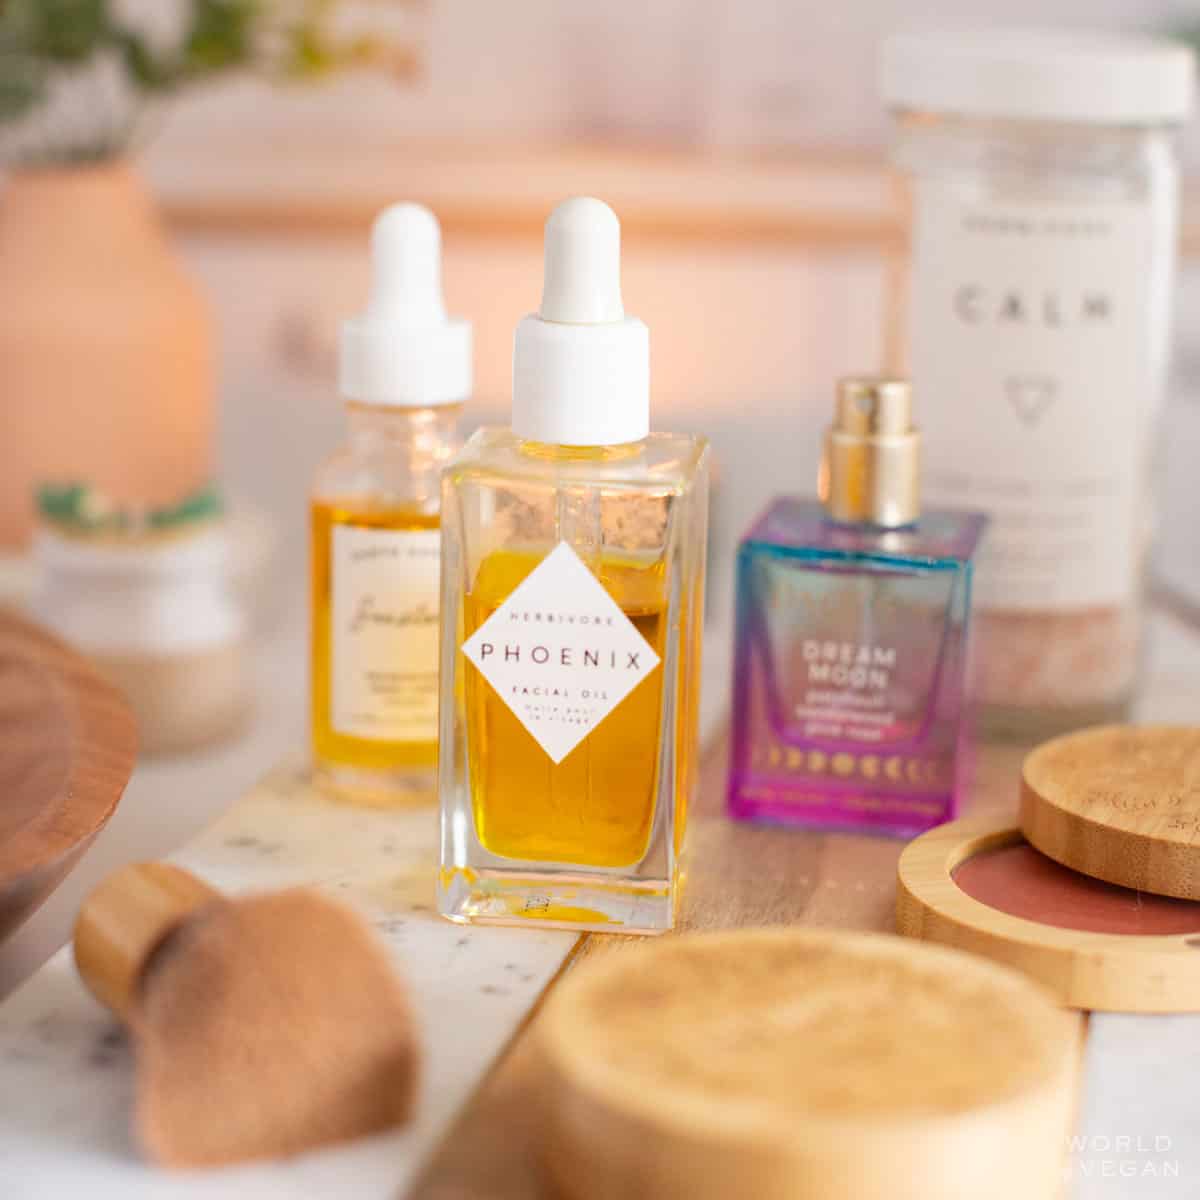 Vegan skincare, makeup, and cruelty-free beauty products on a table with Herbivore facial oil, Pacifica perfume, and more.